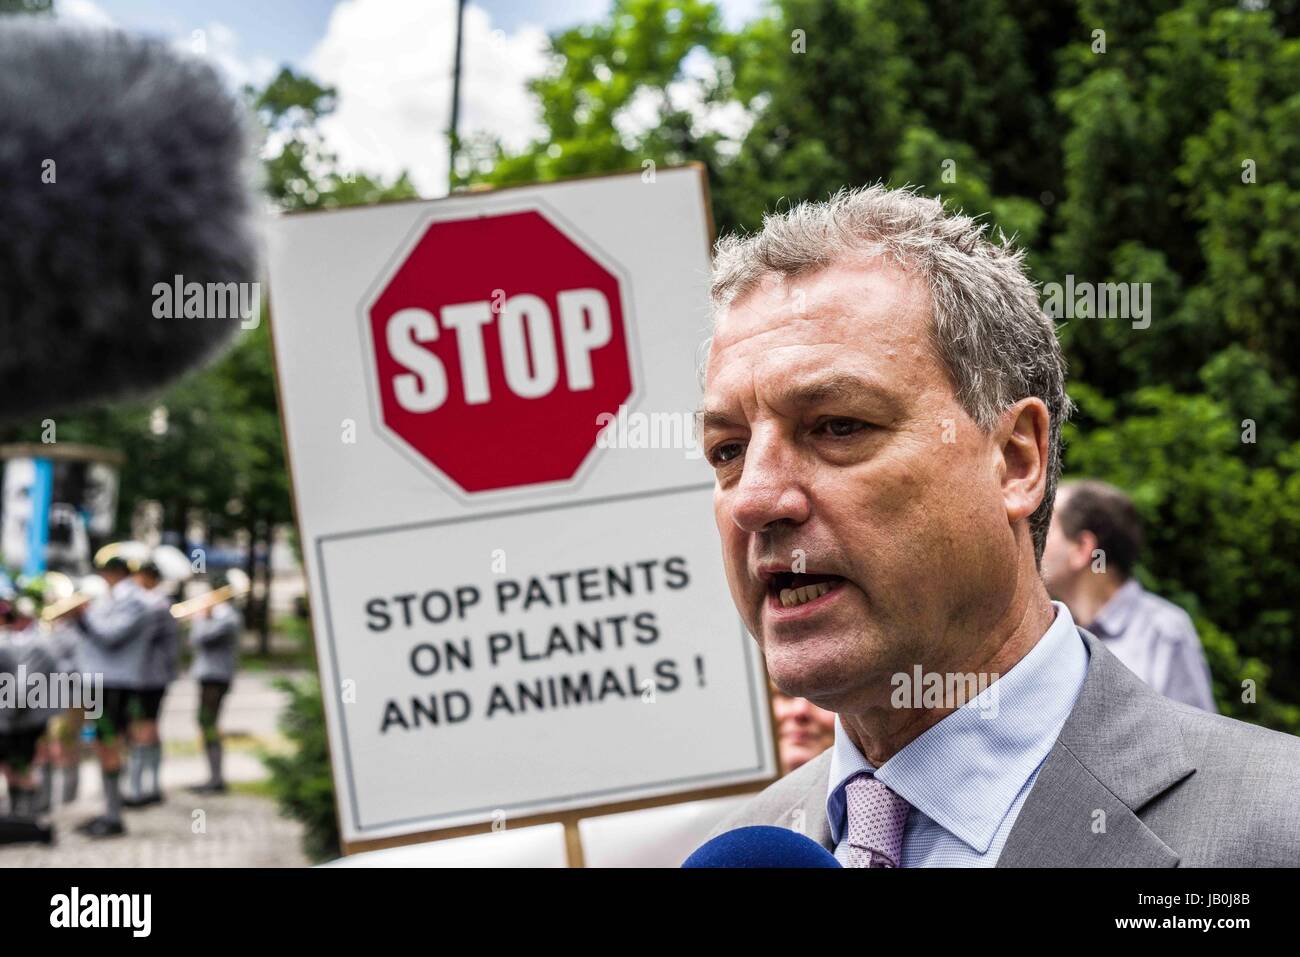 Munich, Germany. 7th June, 2017. RAINER OSTERWALDER, press speaker of the European Patent Office outside where protestors assembled against further patenting of grains used in beer production. In 2016, Carlsberg and Heineken had both secured such patents. The demonstration was organized by the Buendnisse Keine Patente auf Saatgut, who alleges that those who obtain patents on living materials would not only have control of genetically-modified stocks, but also over naturally-produced and selected materials. Credit: Sachelle Babbar/ZUMA Wire/Alamy Live News Stock Photo